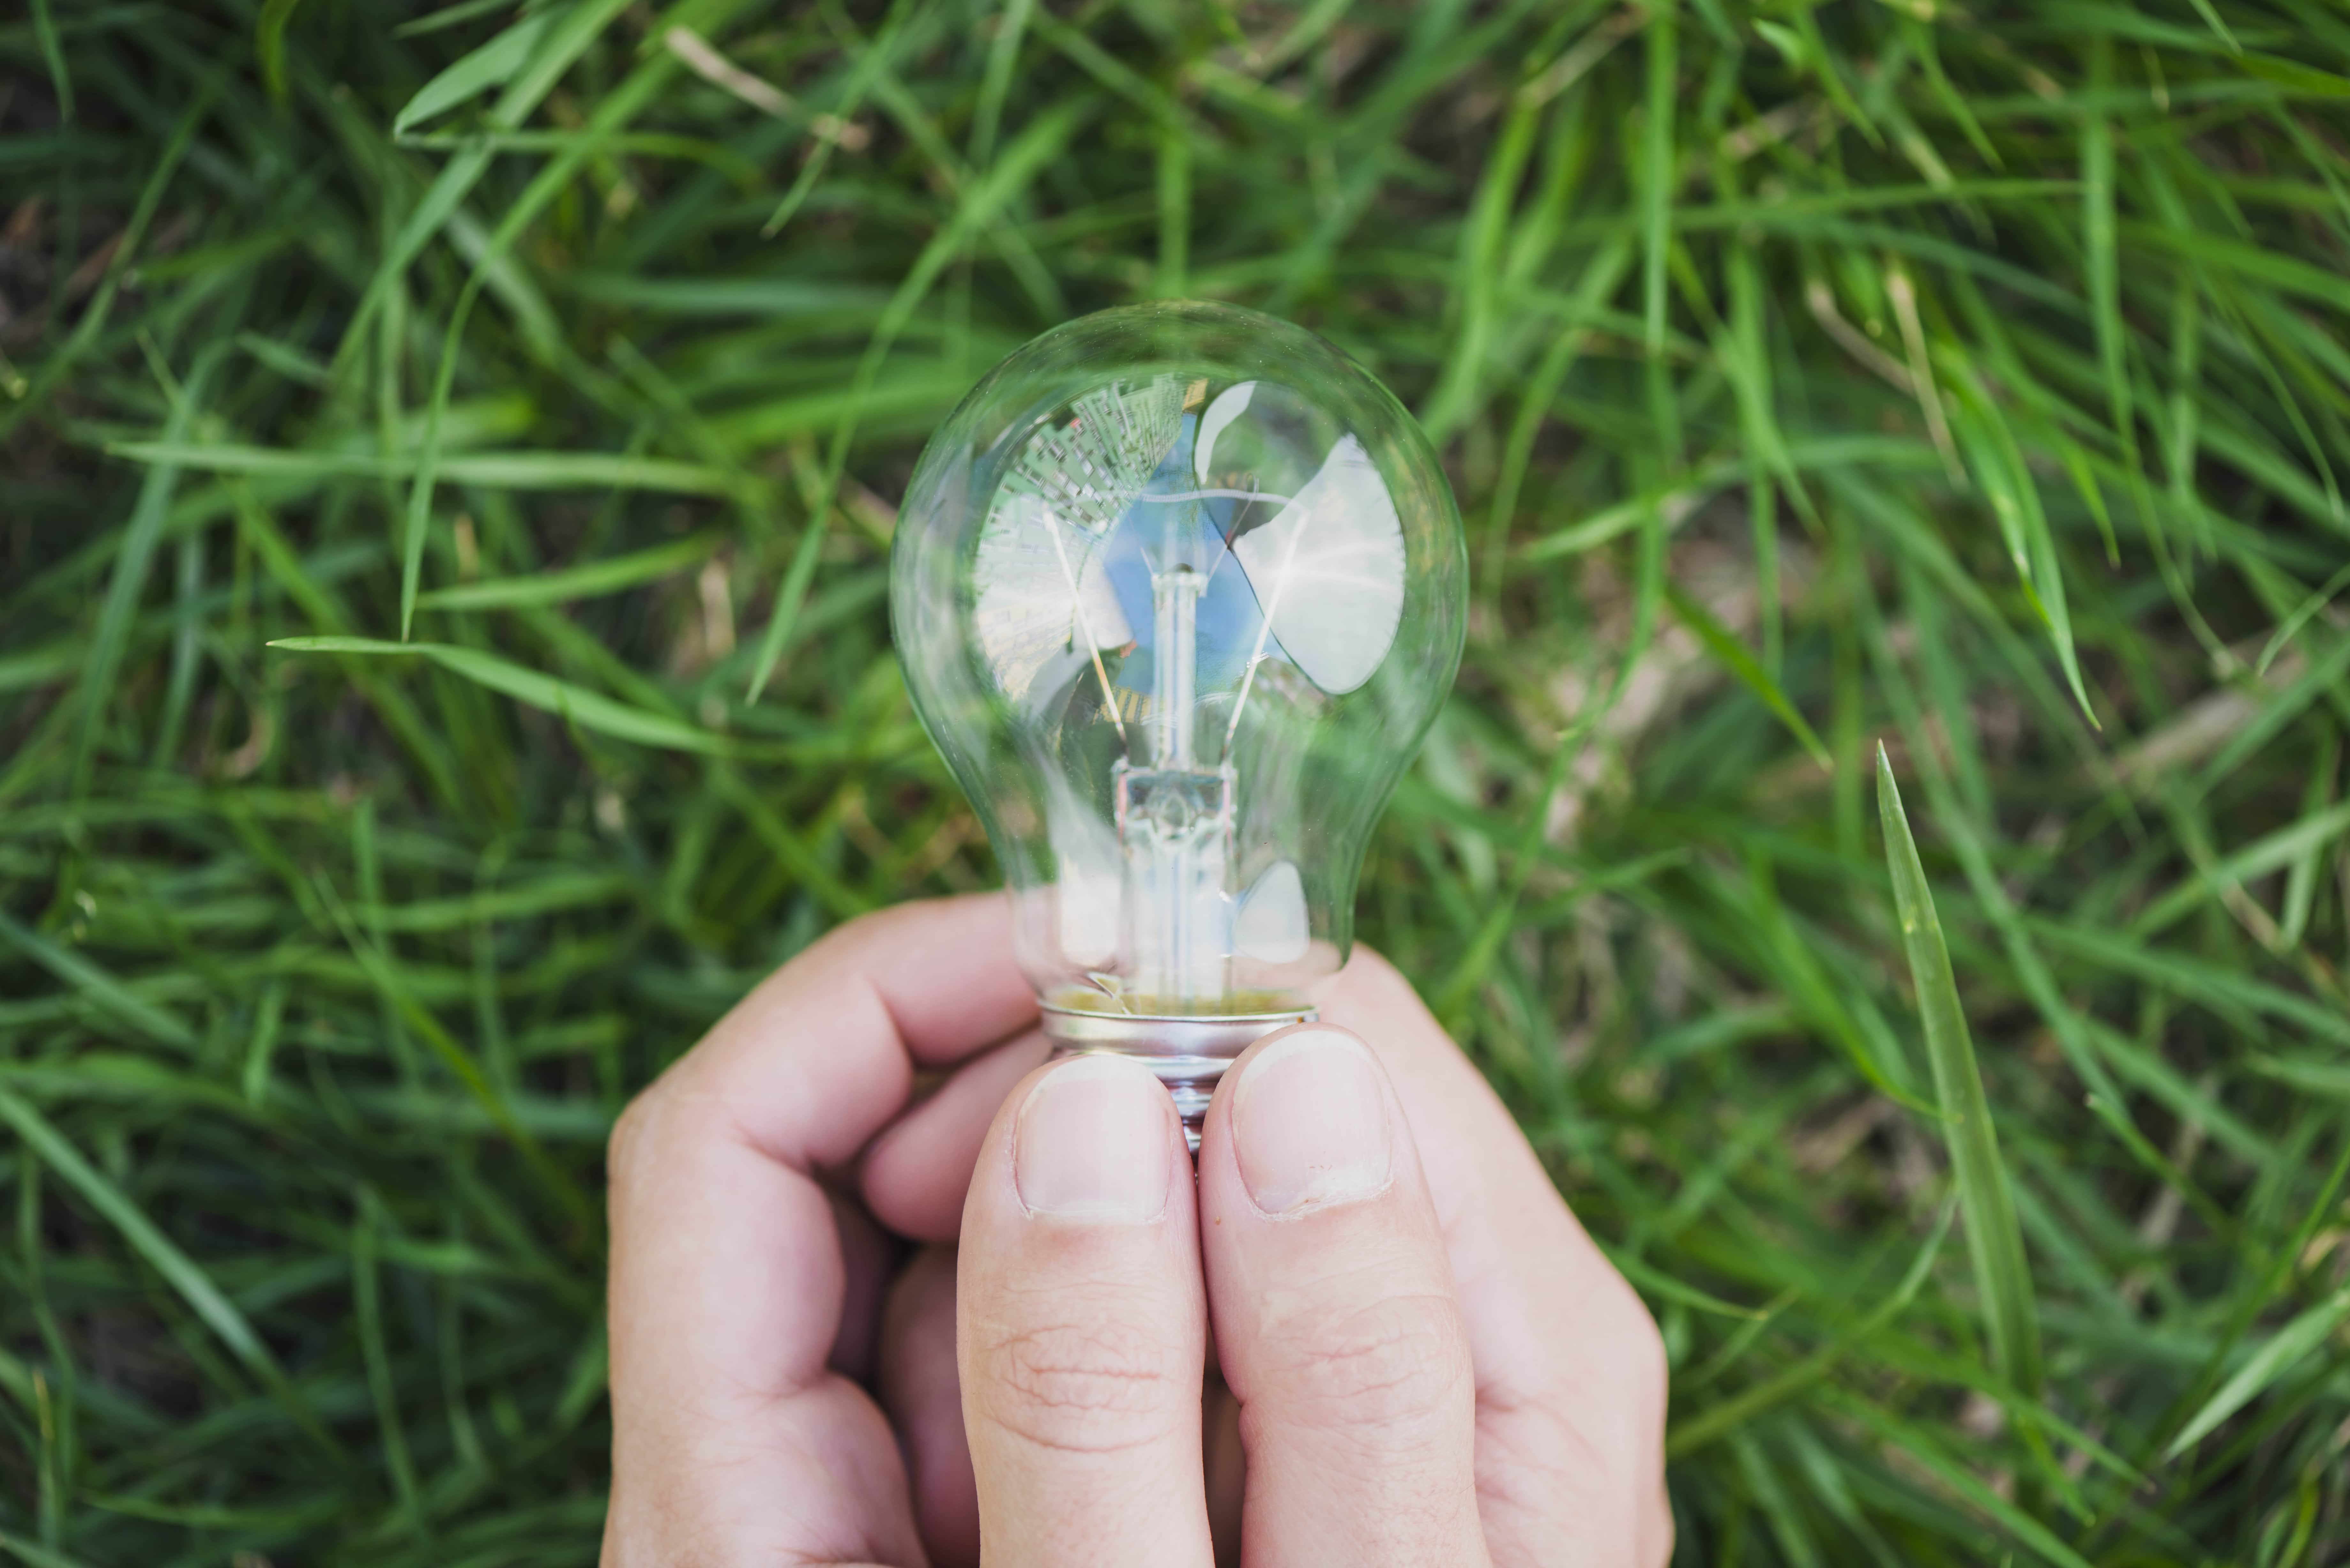 close-up-of-two-hands-holding-light-bulb-against-green-grass-min